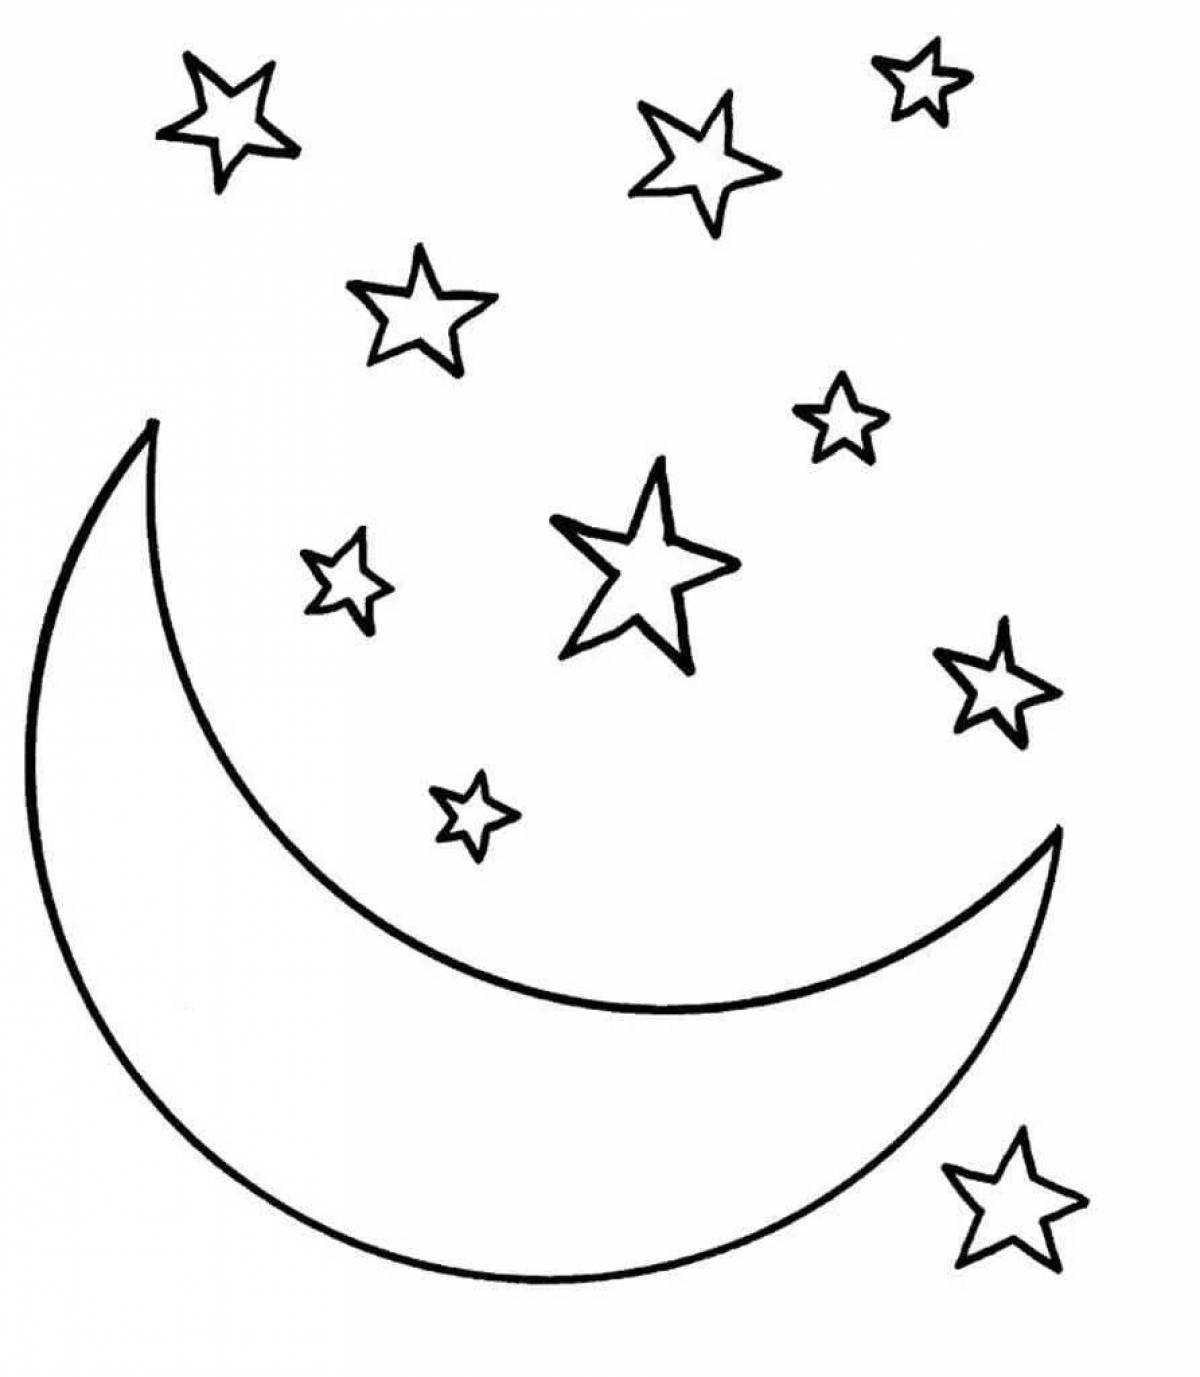 Fancy coloring moon for kids